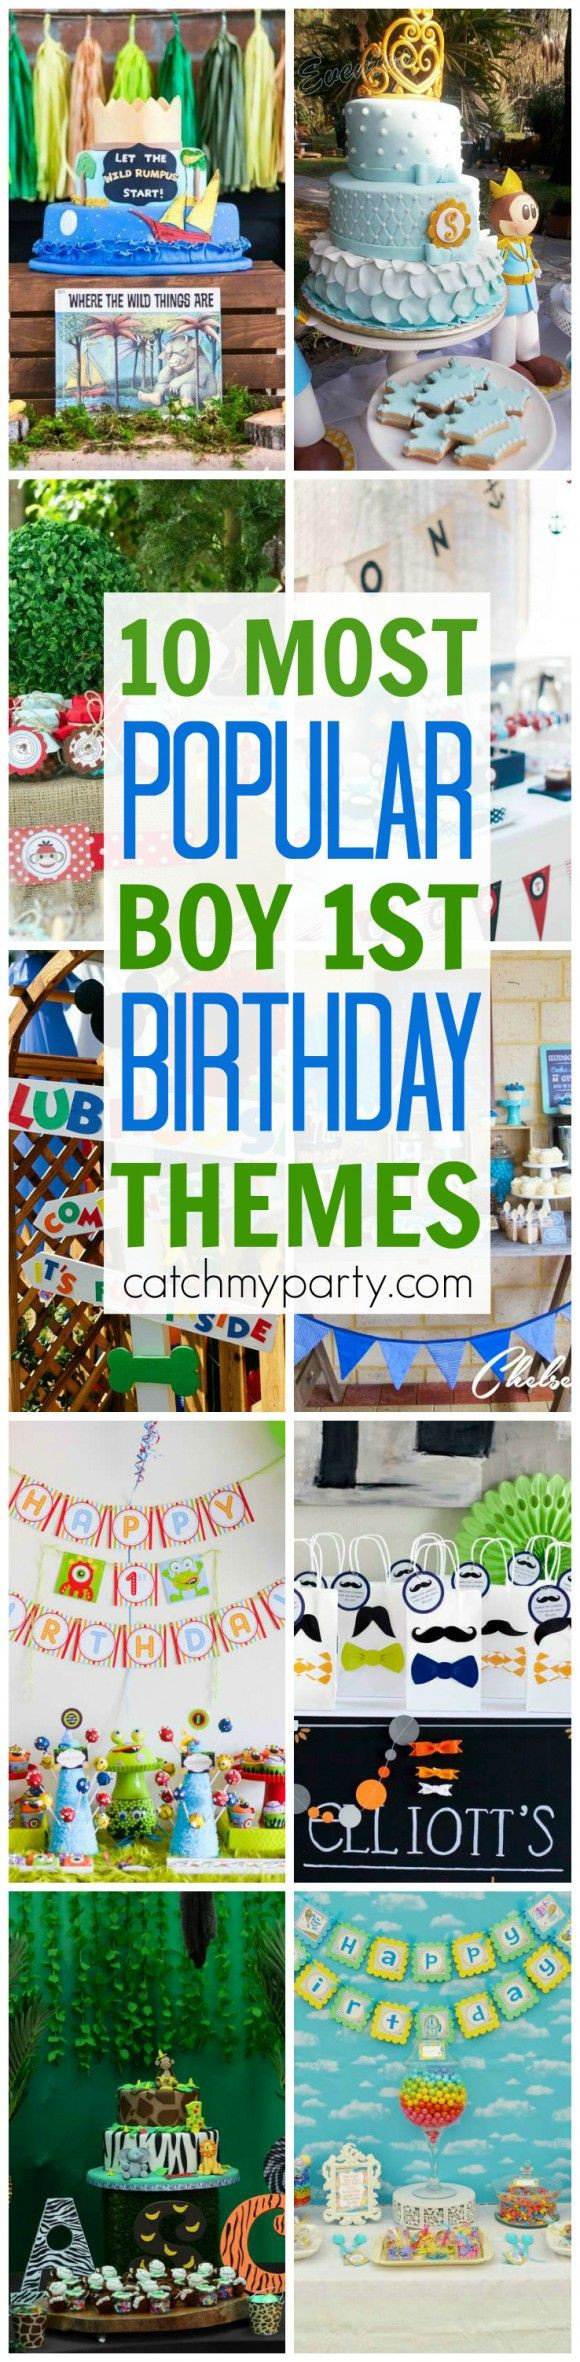 1St Birthday Party Themes For Baby Boy
 10 Most Popular Boy 1st Birthday Party Themes